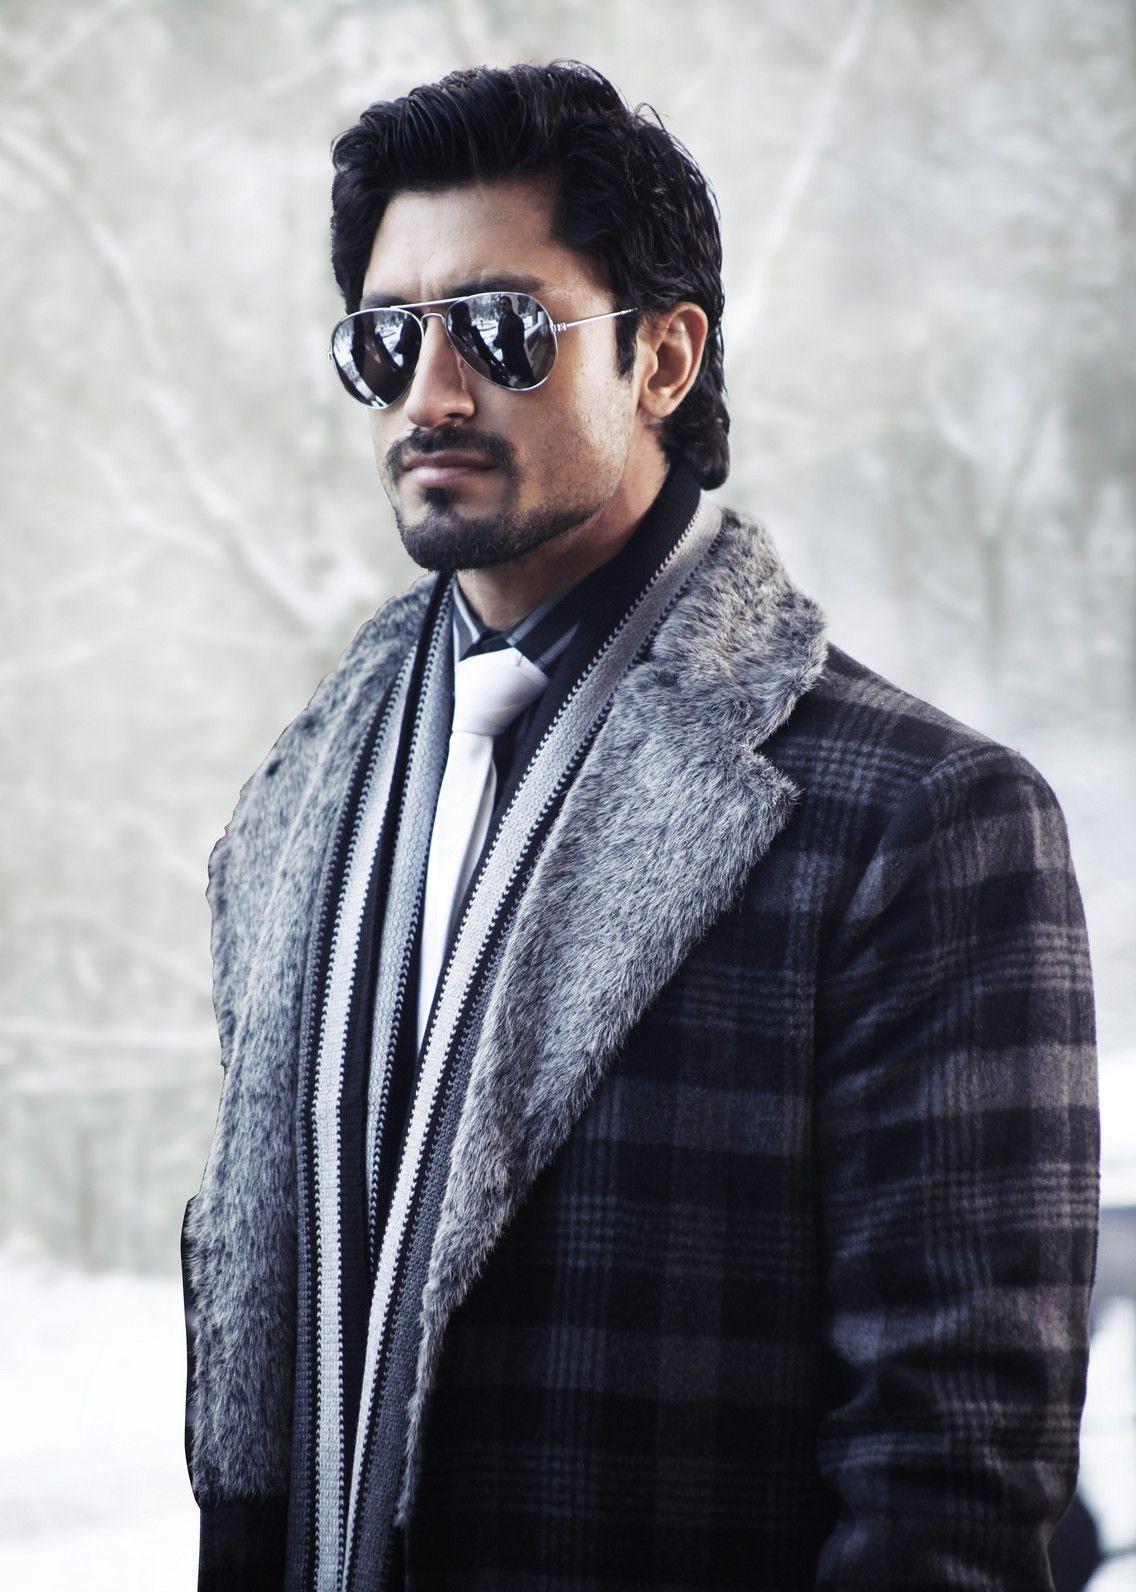 Vidyut Jamwal opens up about his experience on sharing screen space with the three reigning stars in the Tamil film industry